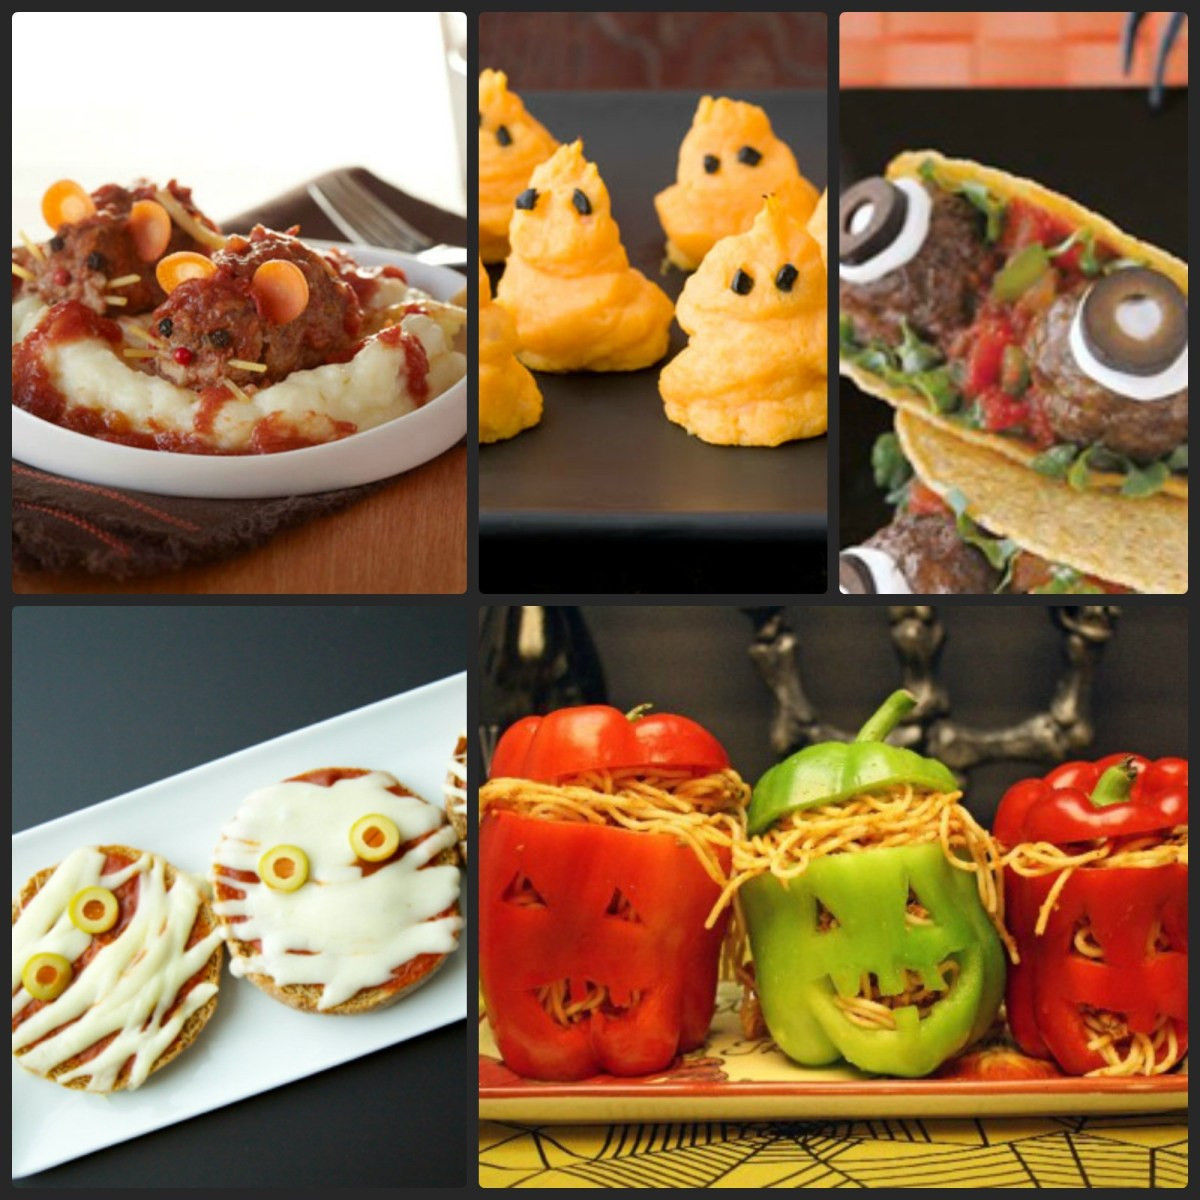 Spooky Halloween Dinners
 Spooky Halloween Dinners — Today s Every Mom